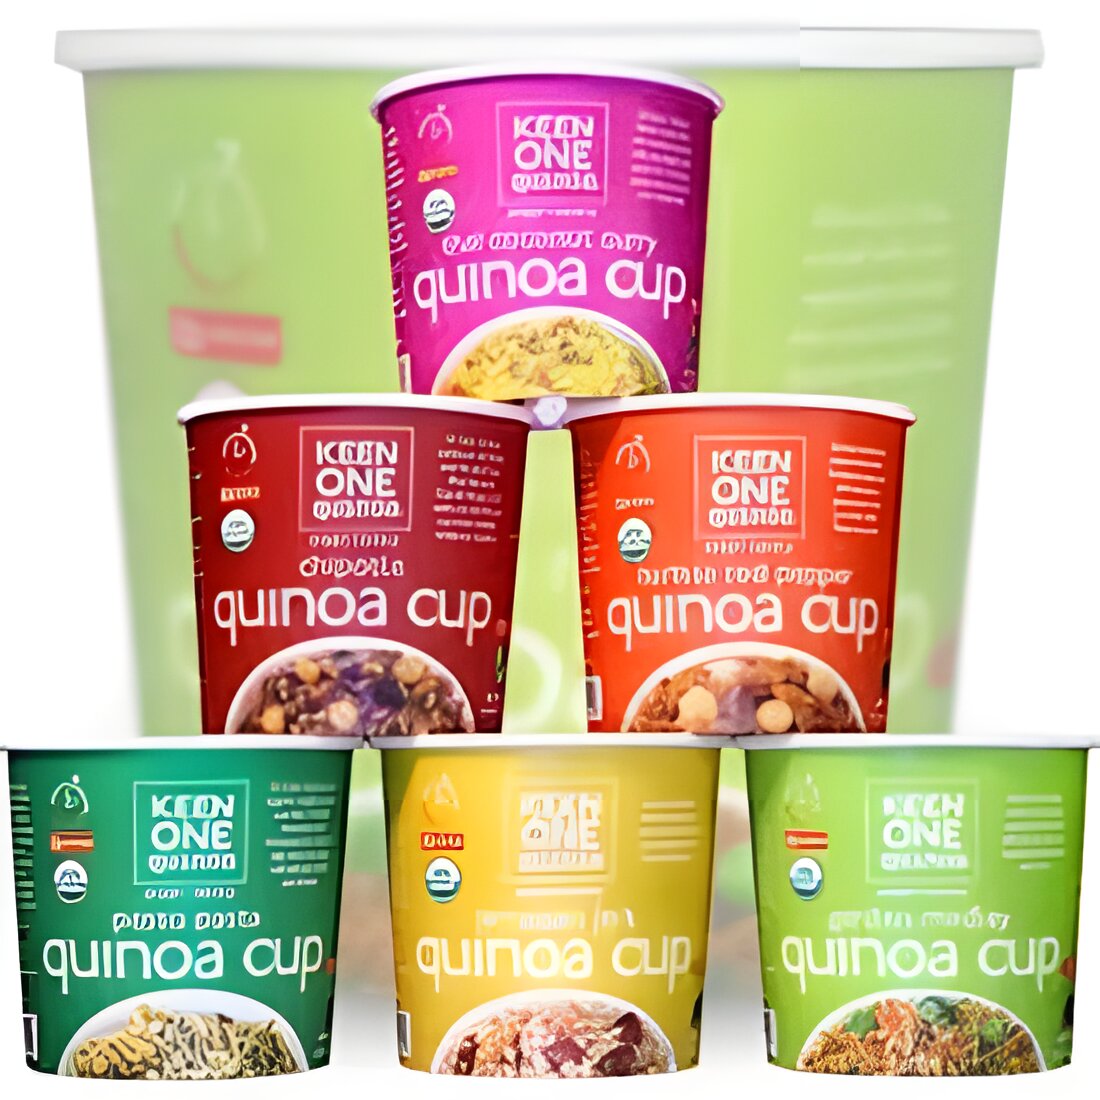 Free Keen One Quinoa Cups